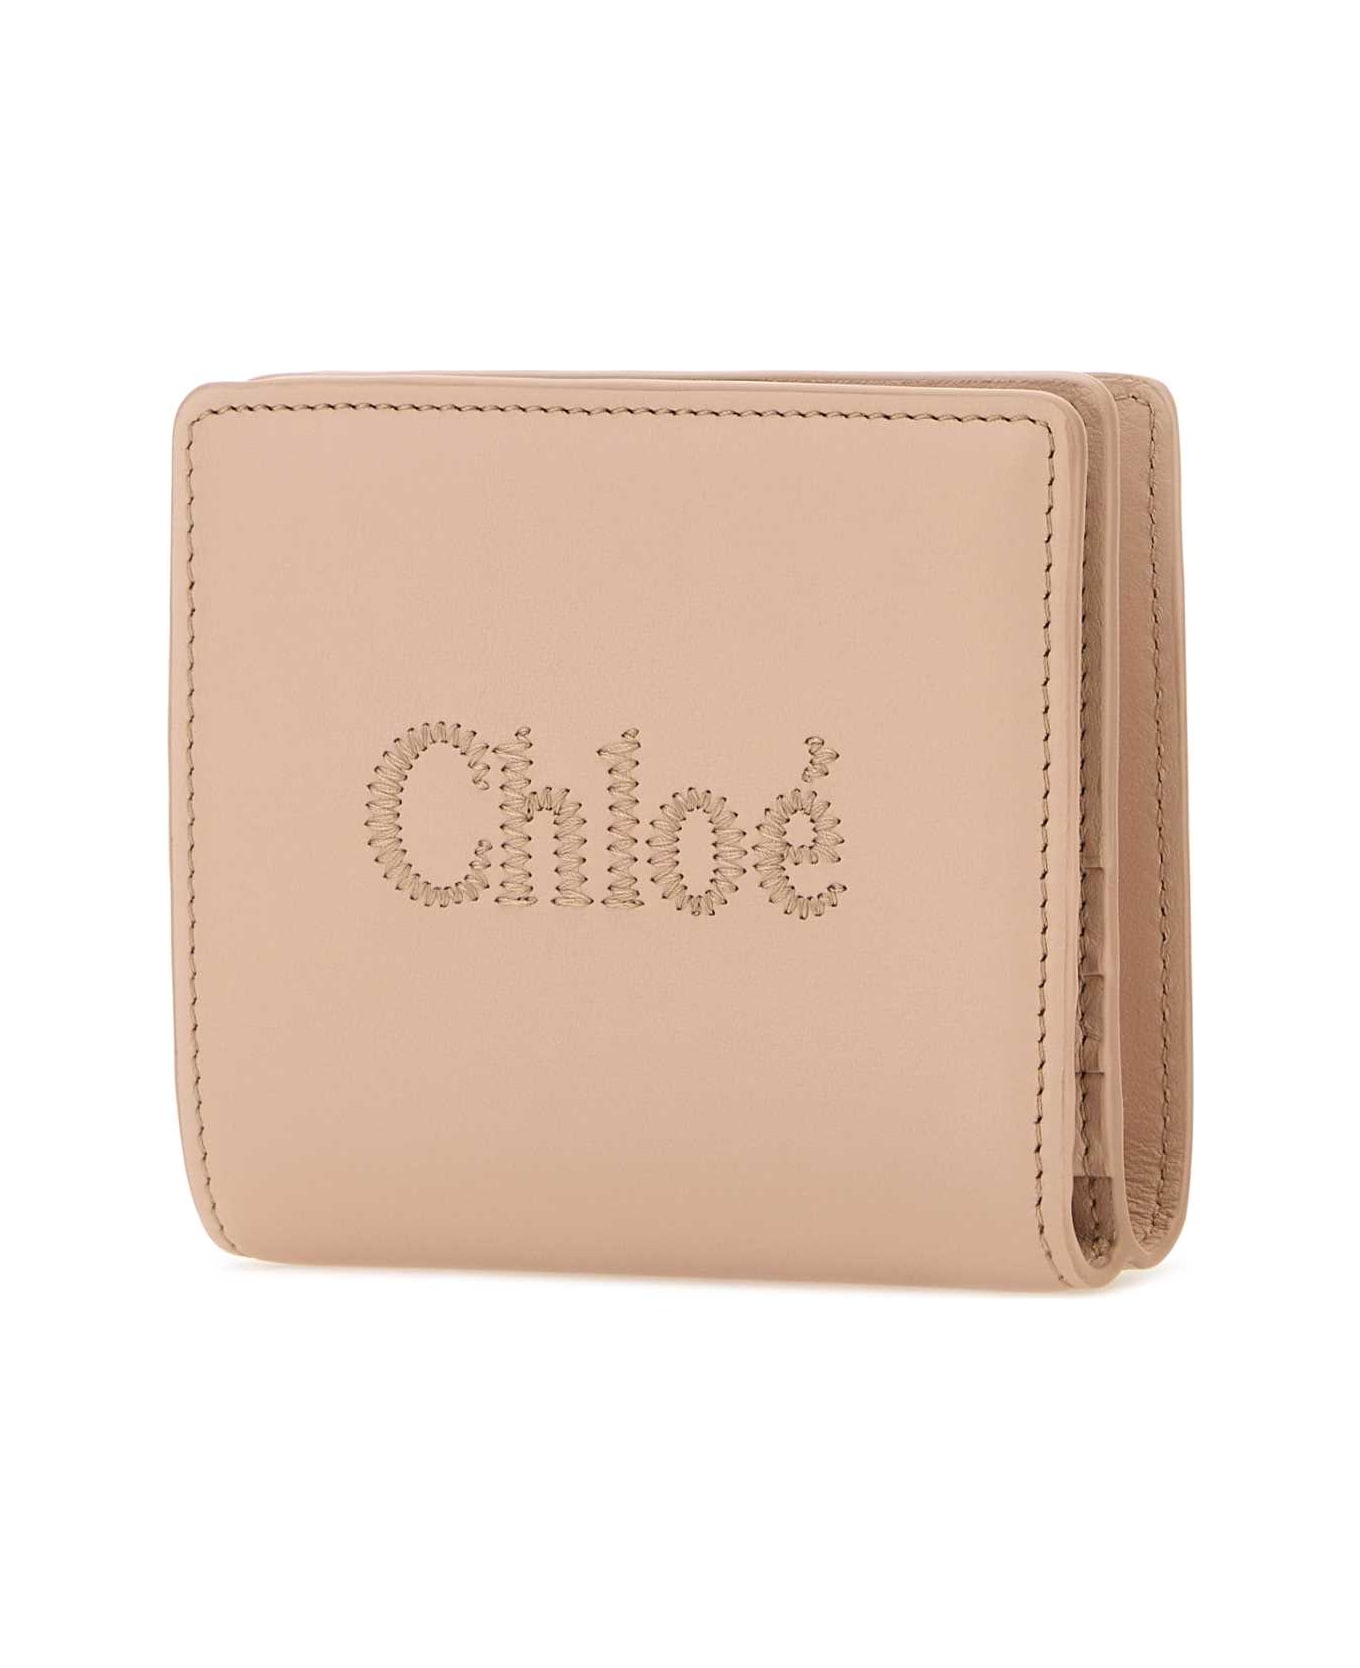 Chloé Skin Pink Leather Wallet - CEMENTPINK